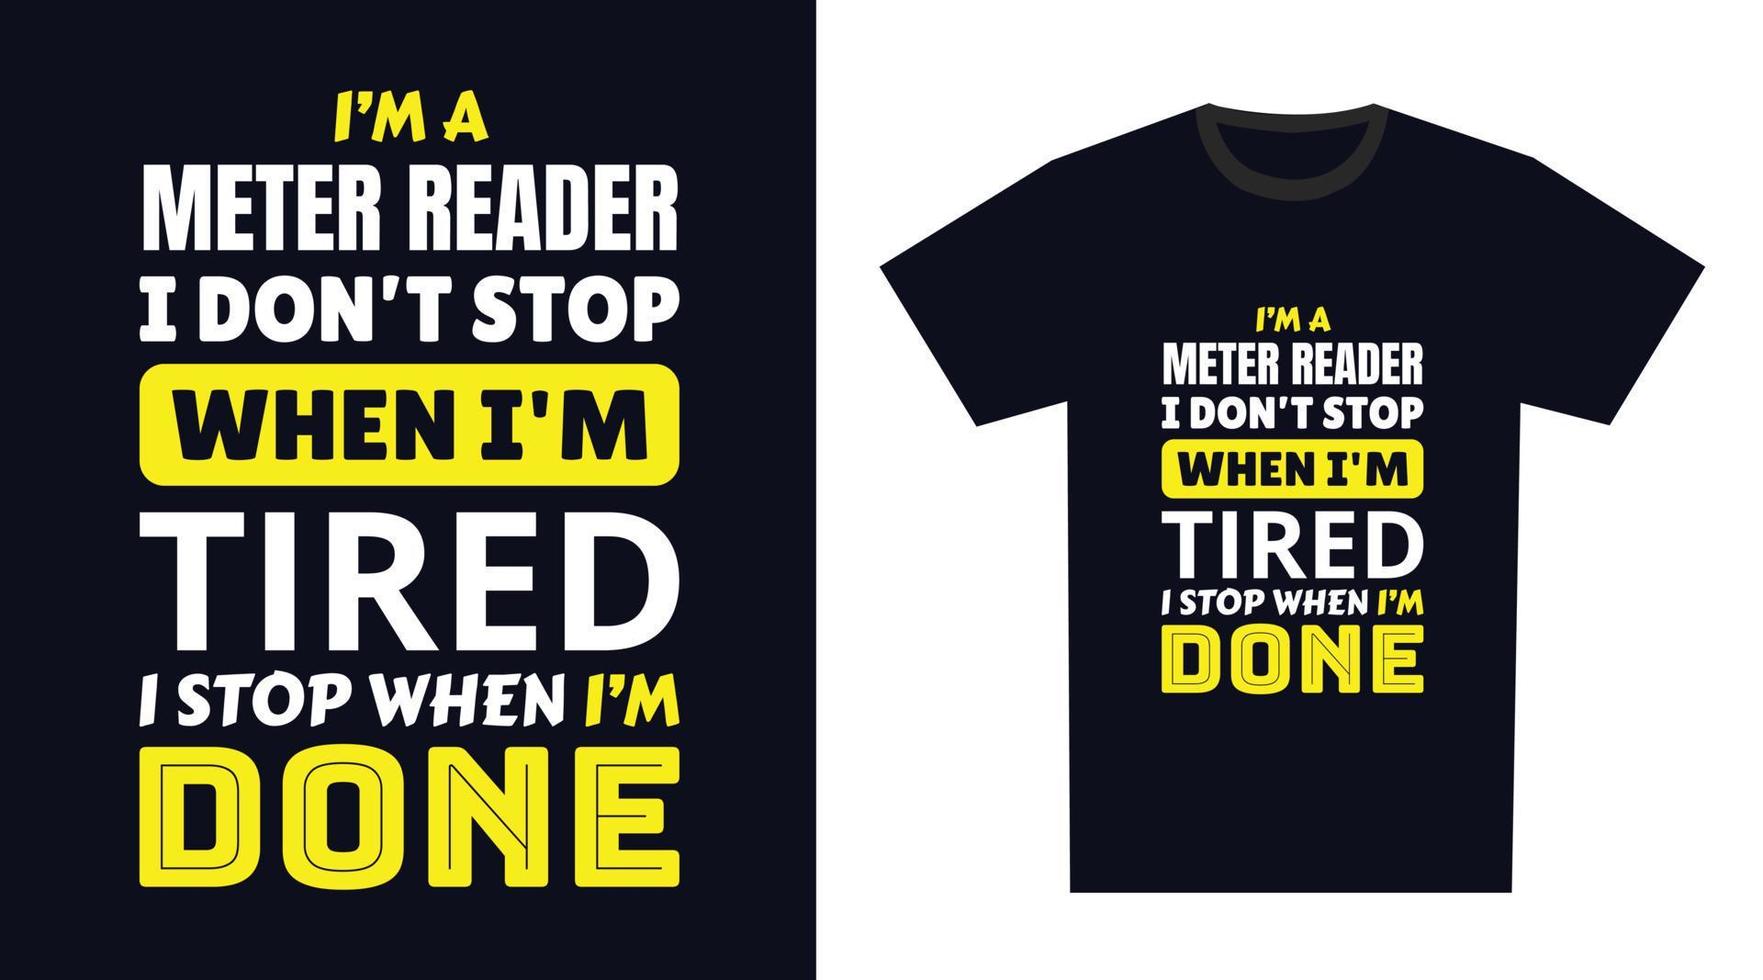 meter reader T Shirt Design. I 'm a meter reader I Don't Stop When I'm Tired, I Stop When I'm Done vector